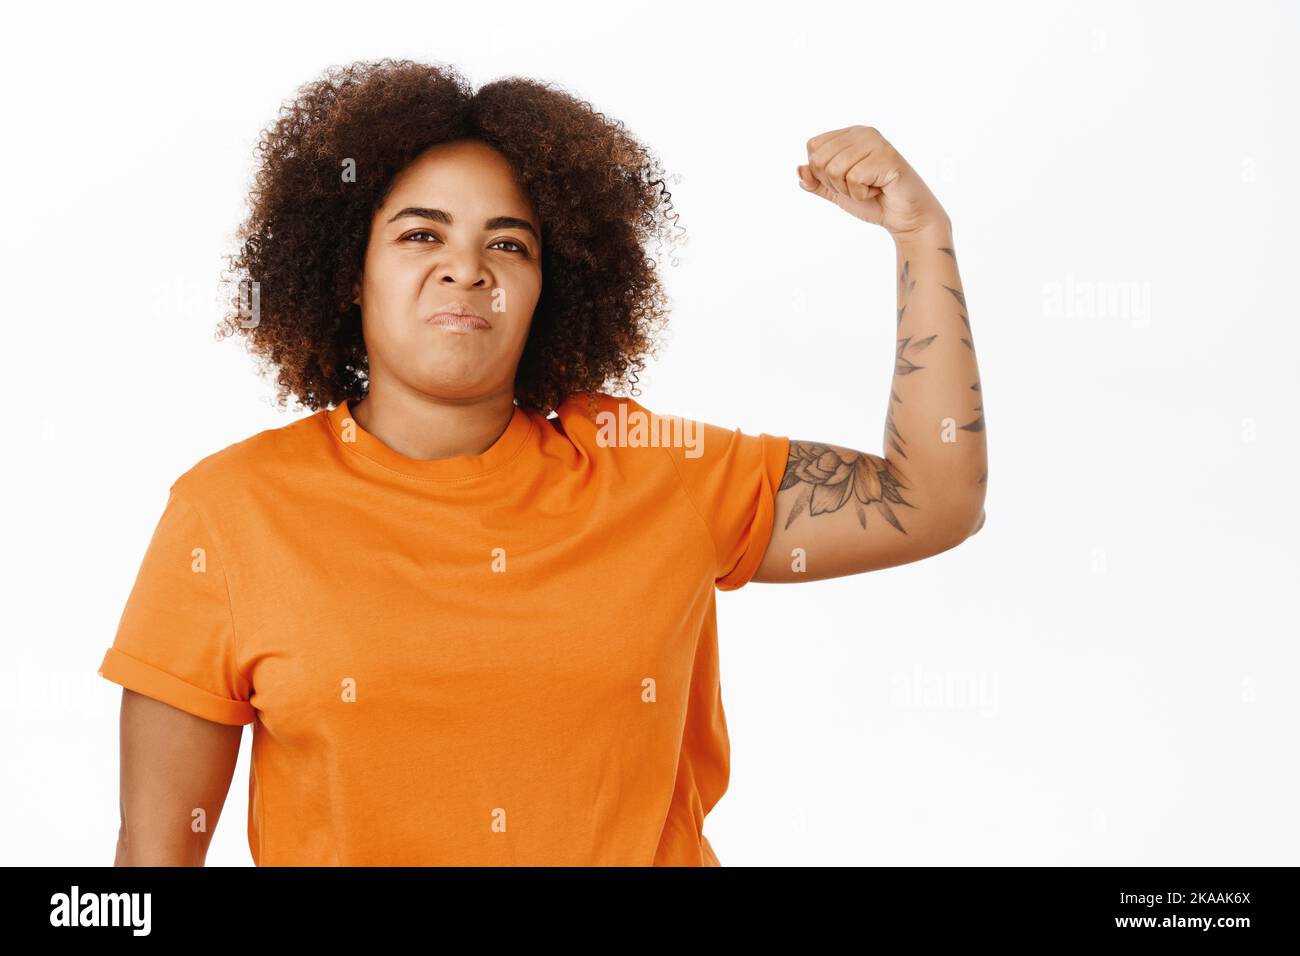 Girl power. Sassy young african american woman, flexing biceps, shows muscles strong arm, looking confident, standing over white background Stock Photo